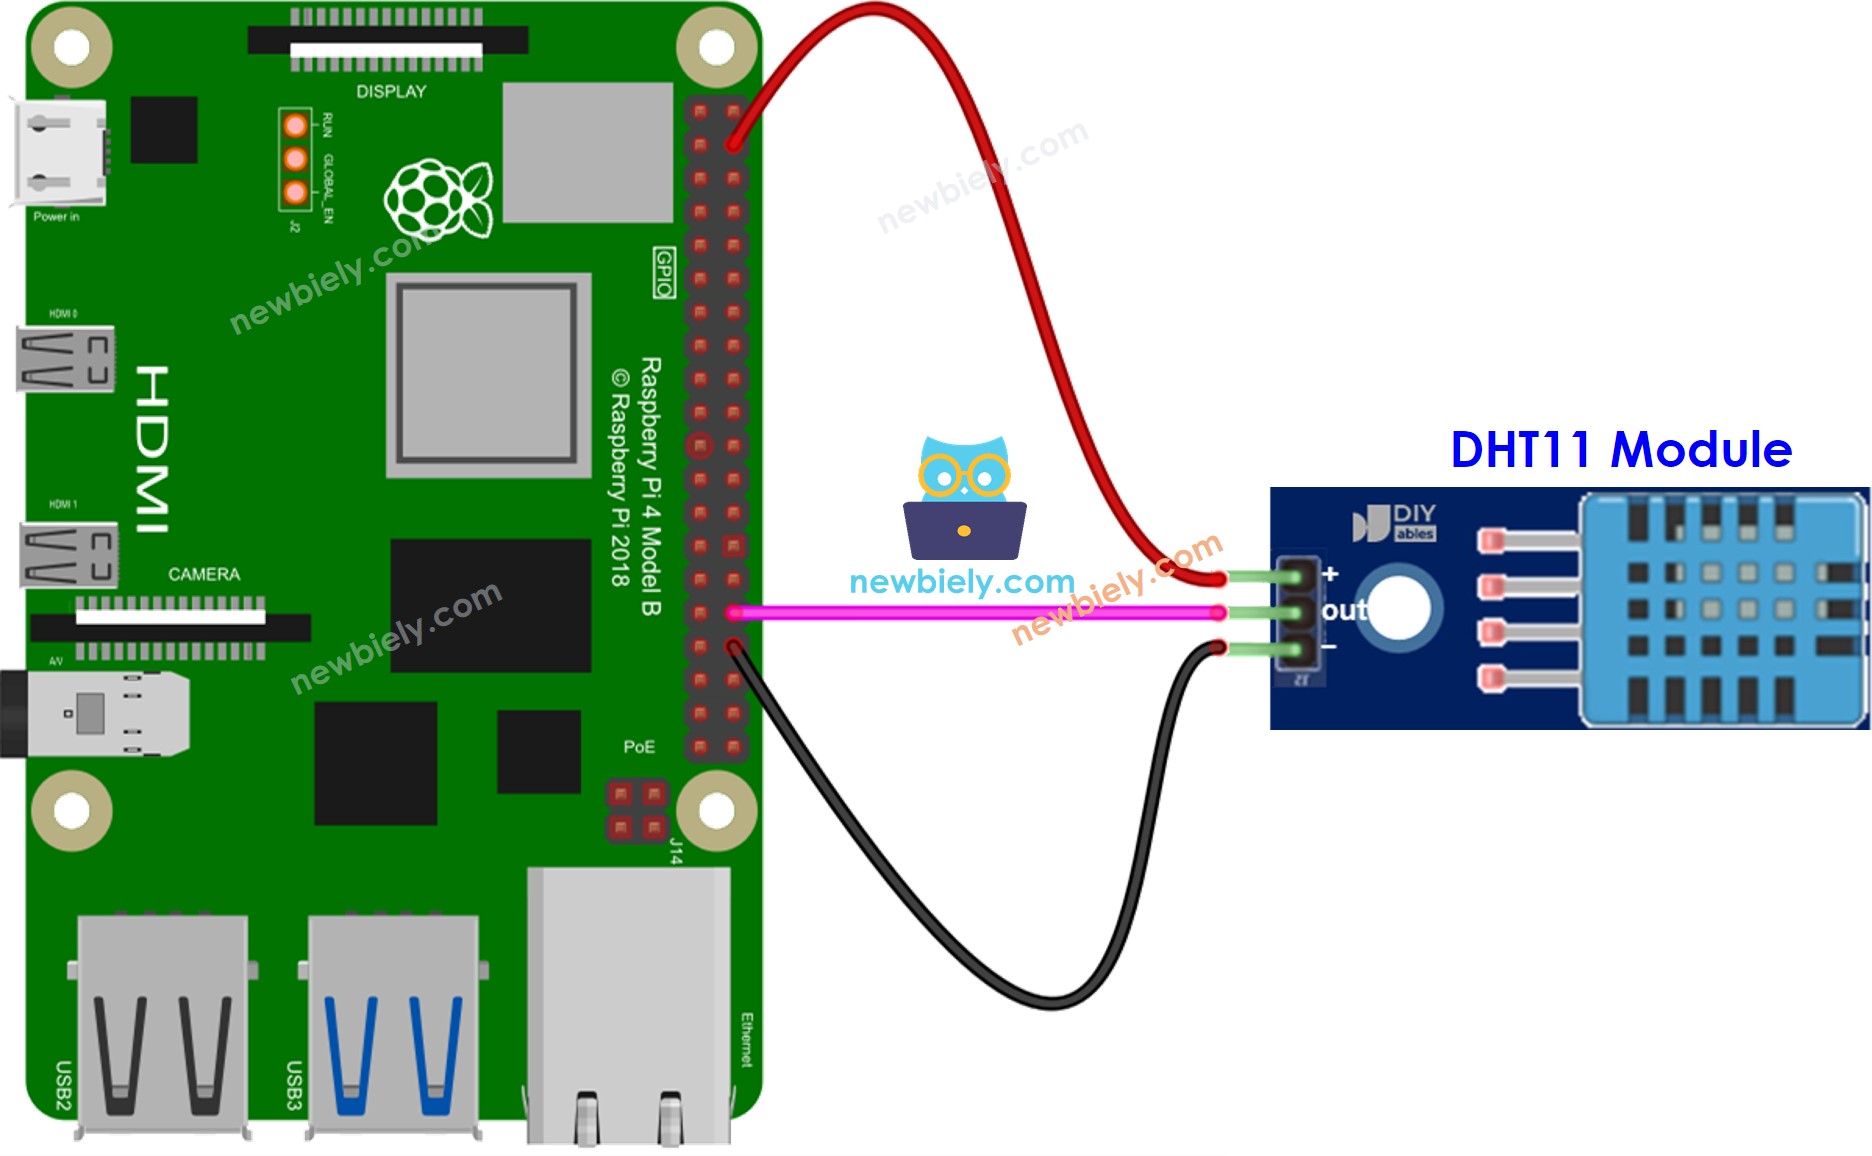 The wiring diagram between Raspberry Pi and DHT11 Temperature and humidity Module